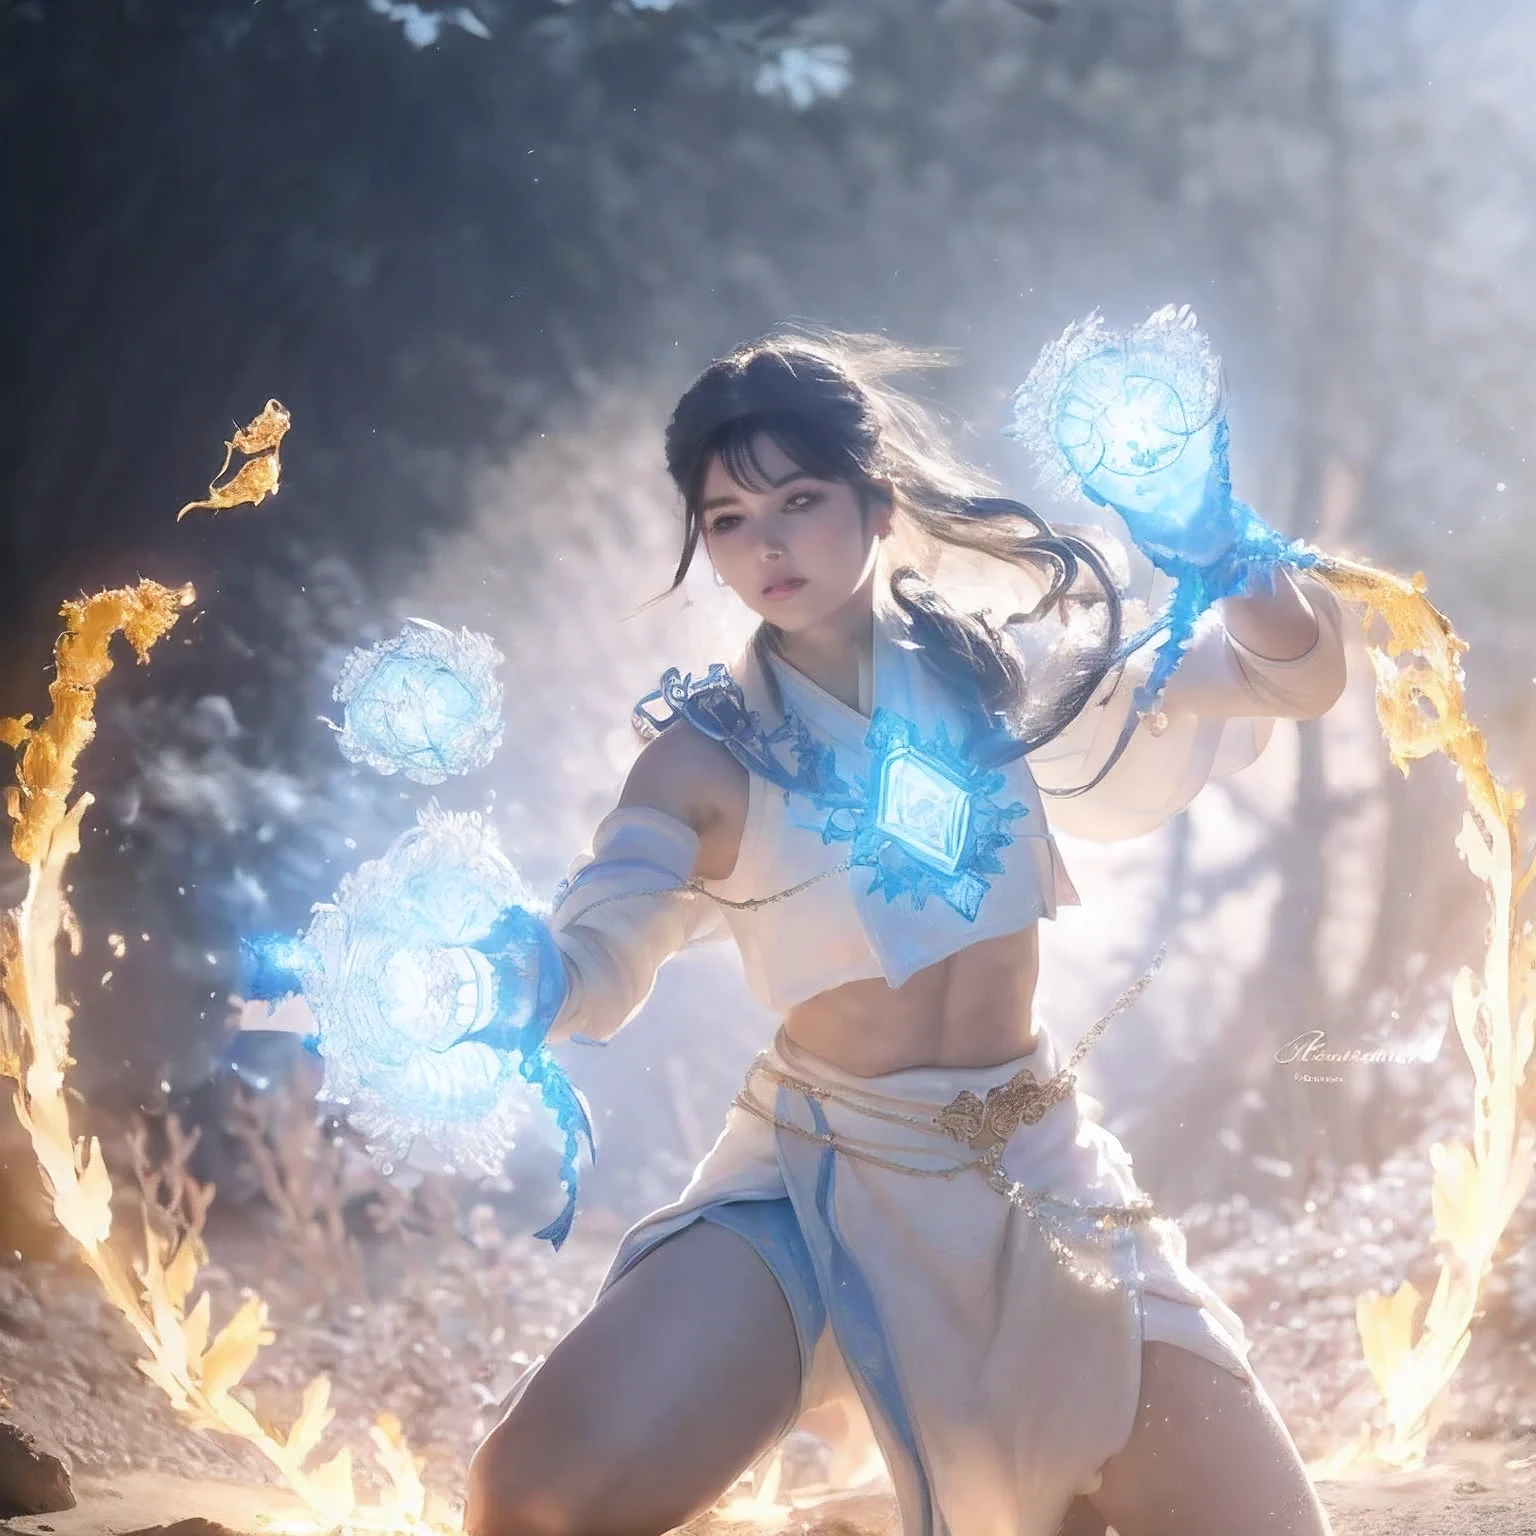 arafed(((Perfect college student))) in a white outfit holding a blue fire, the sorceress casting a fireball, female mage conjuring a spell, a sorceress casting a ice ball, she has fire powers, closeup fantasy with water magic, asian female water elemental, maya ali as a lightning mage, glowing lens flare wraith girl, casting fire spell